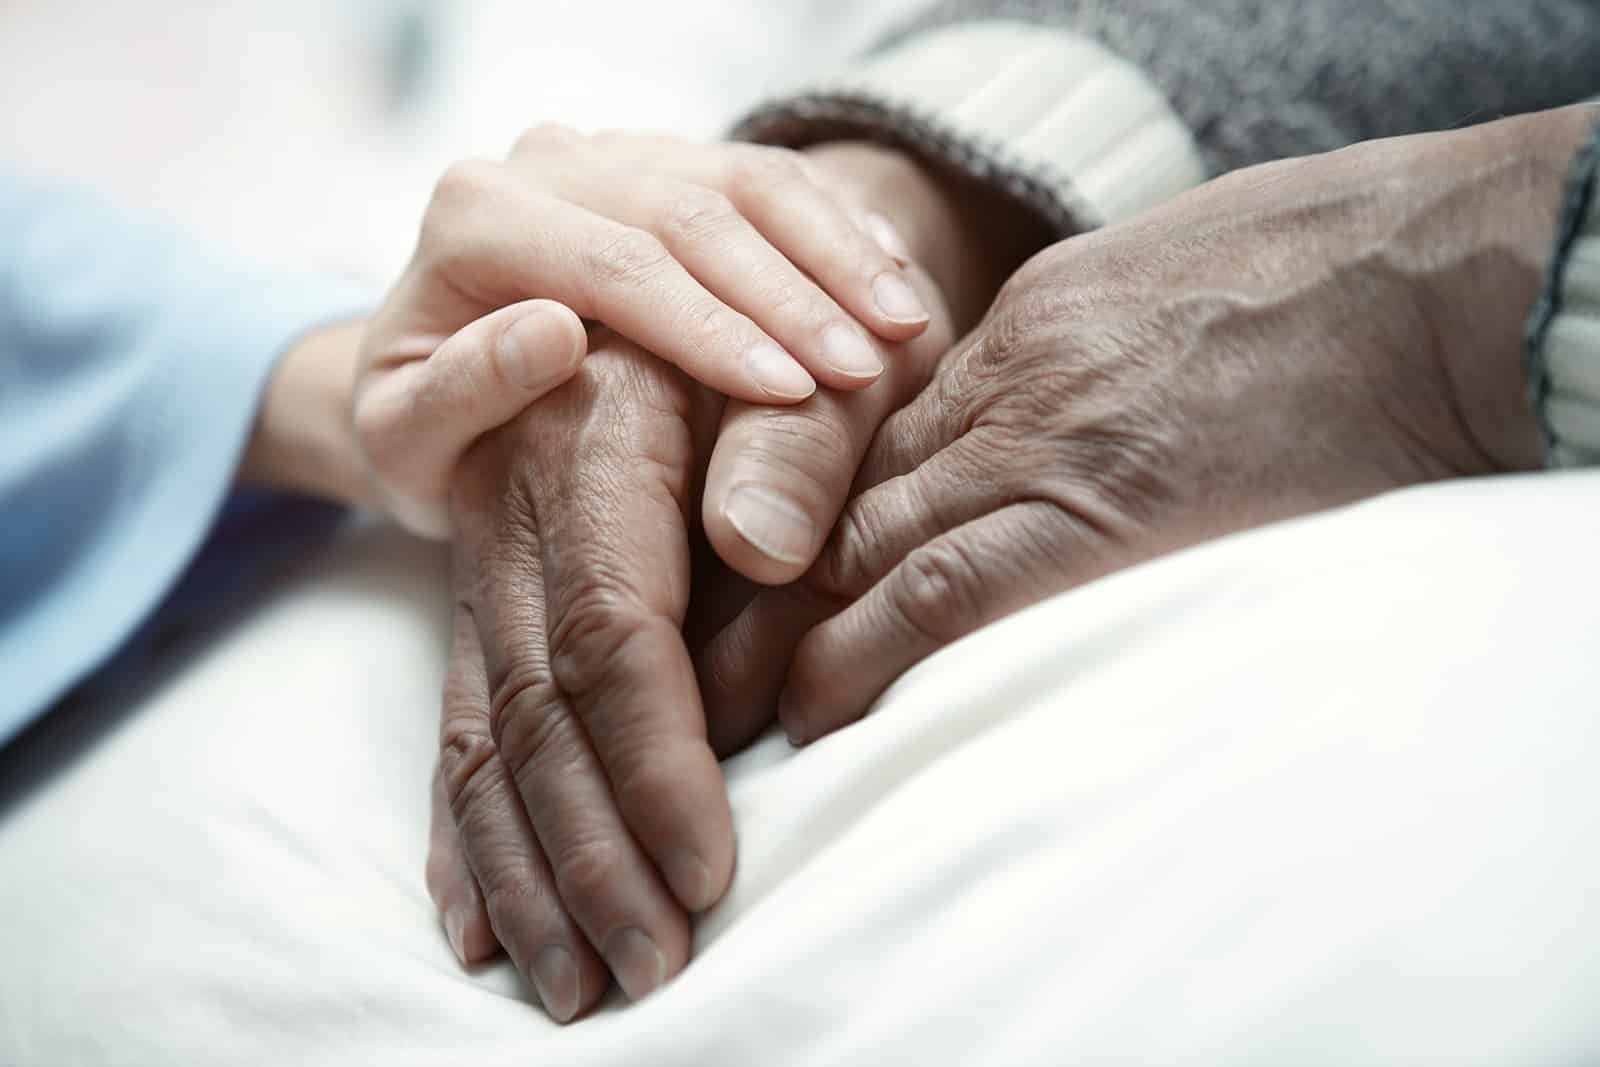 Caring Hands Holding a Patient's Hands